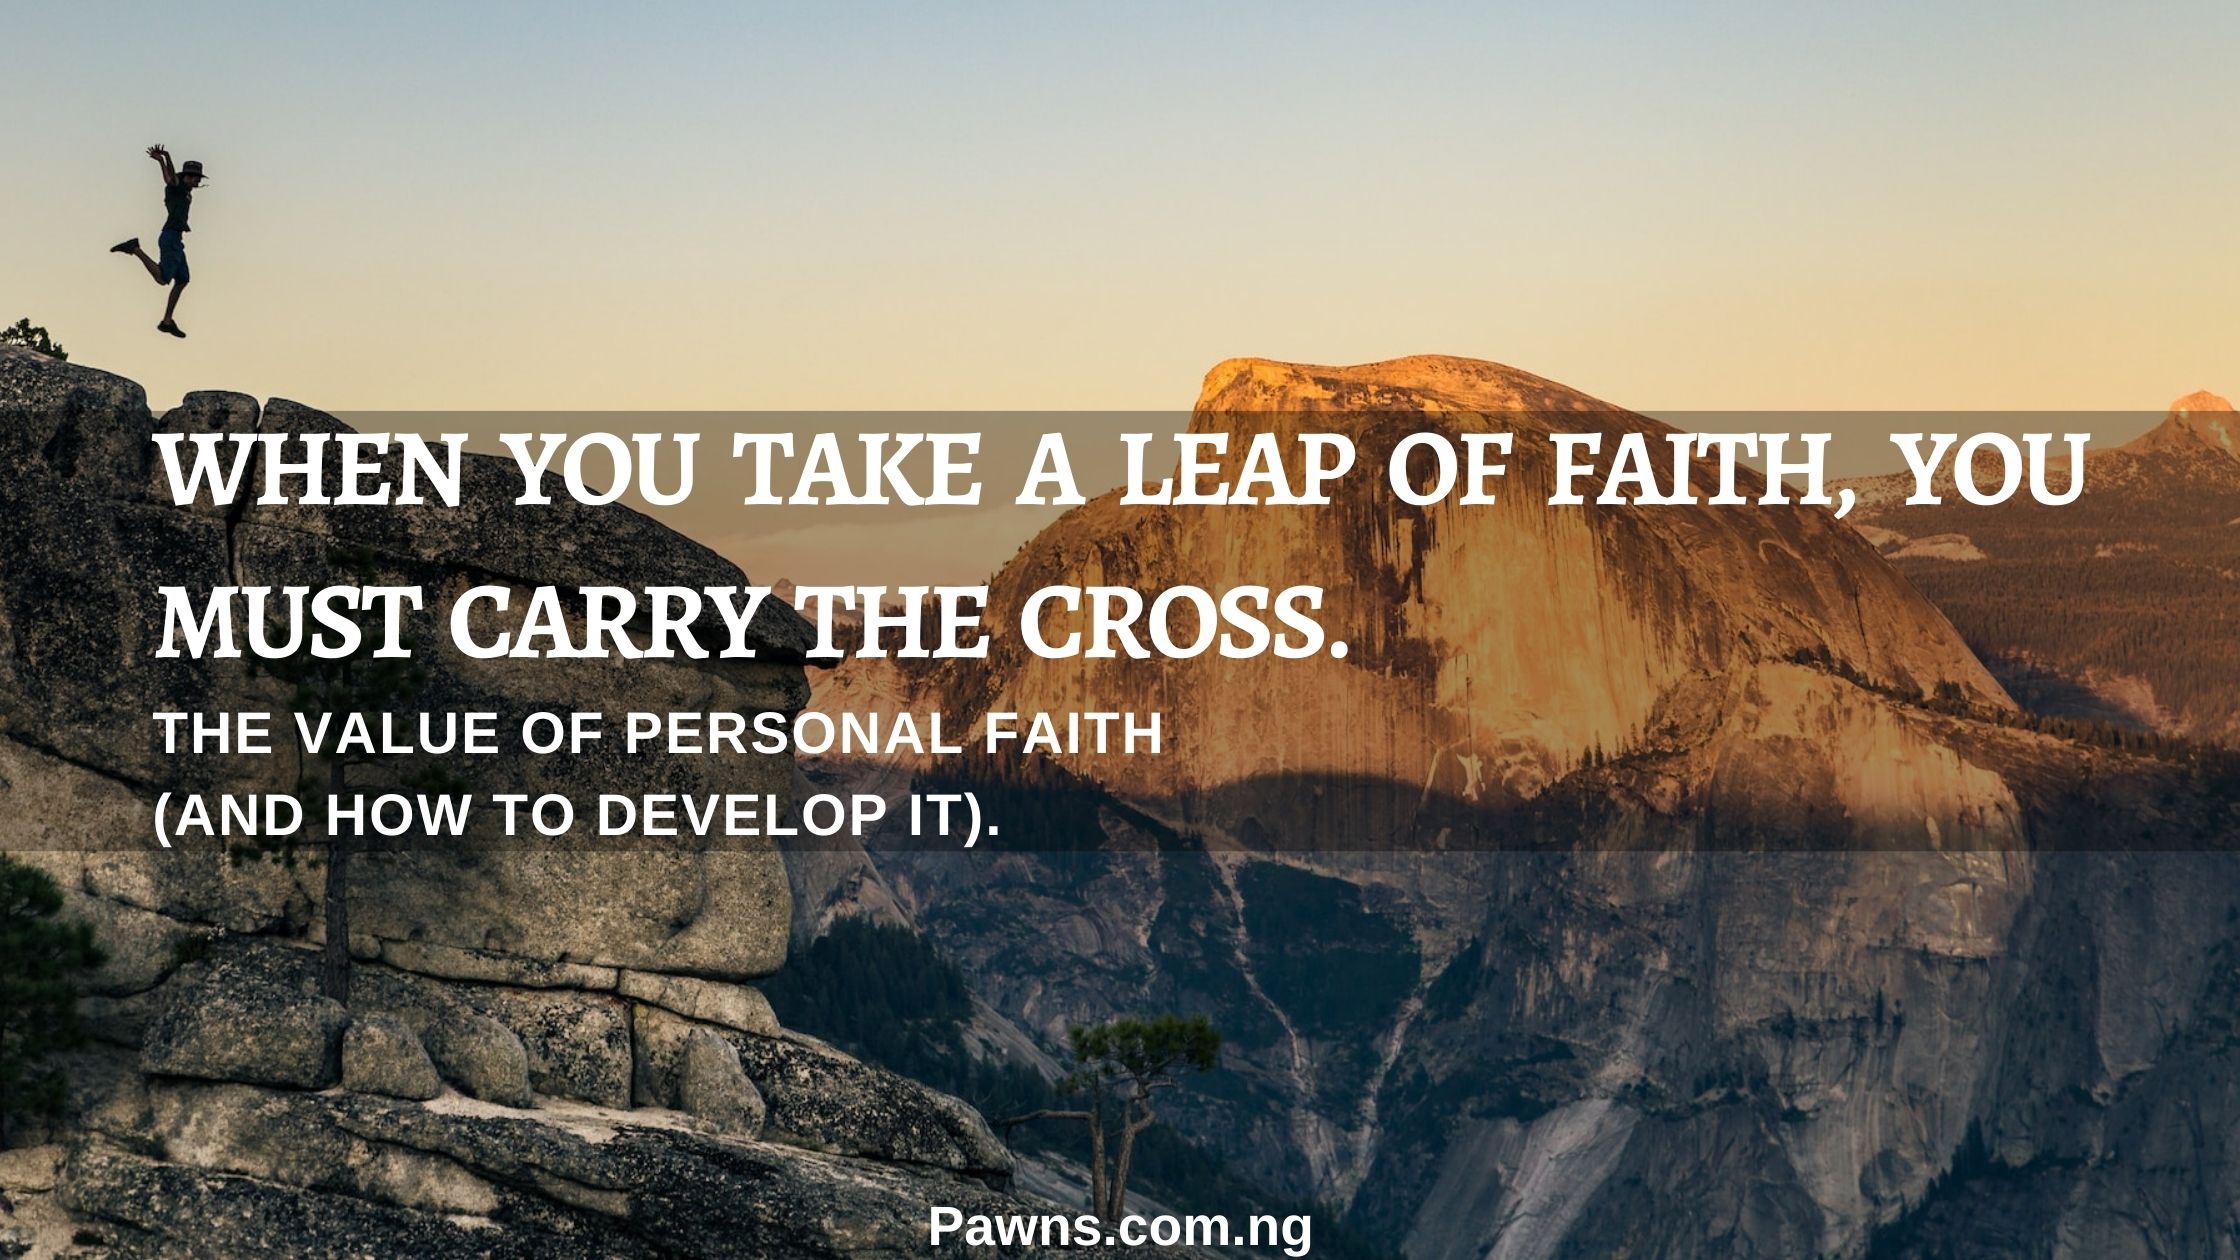 The Value of Personal Faith And How To Develop It When you take a leap of faith, you must carry the cross